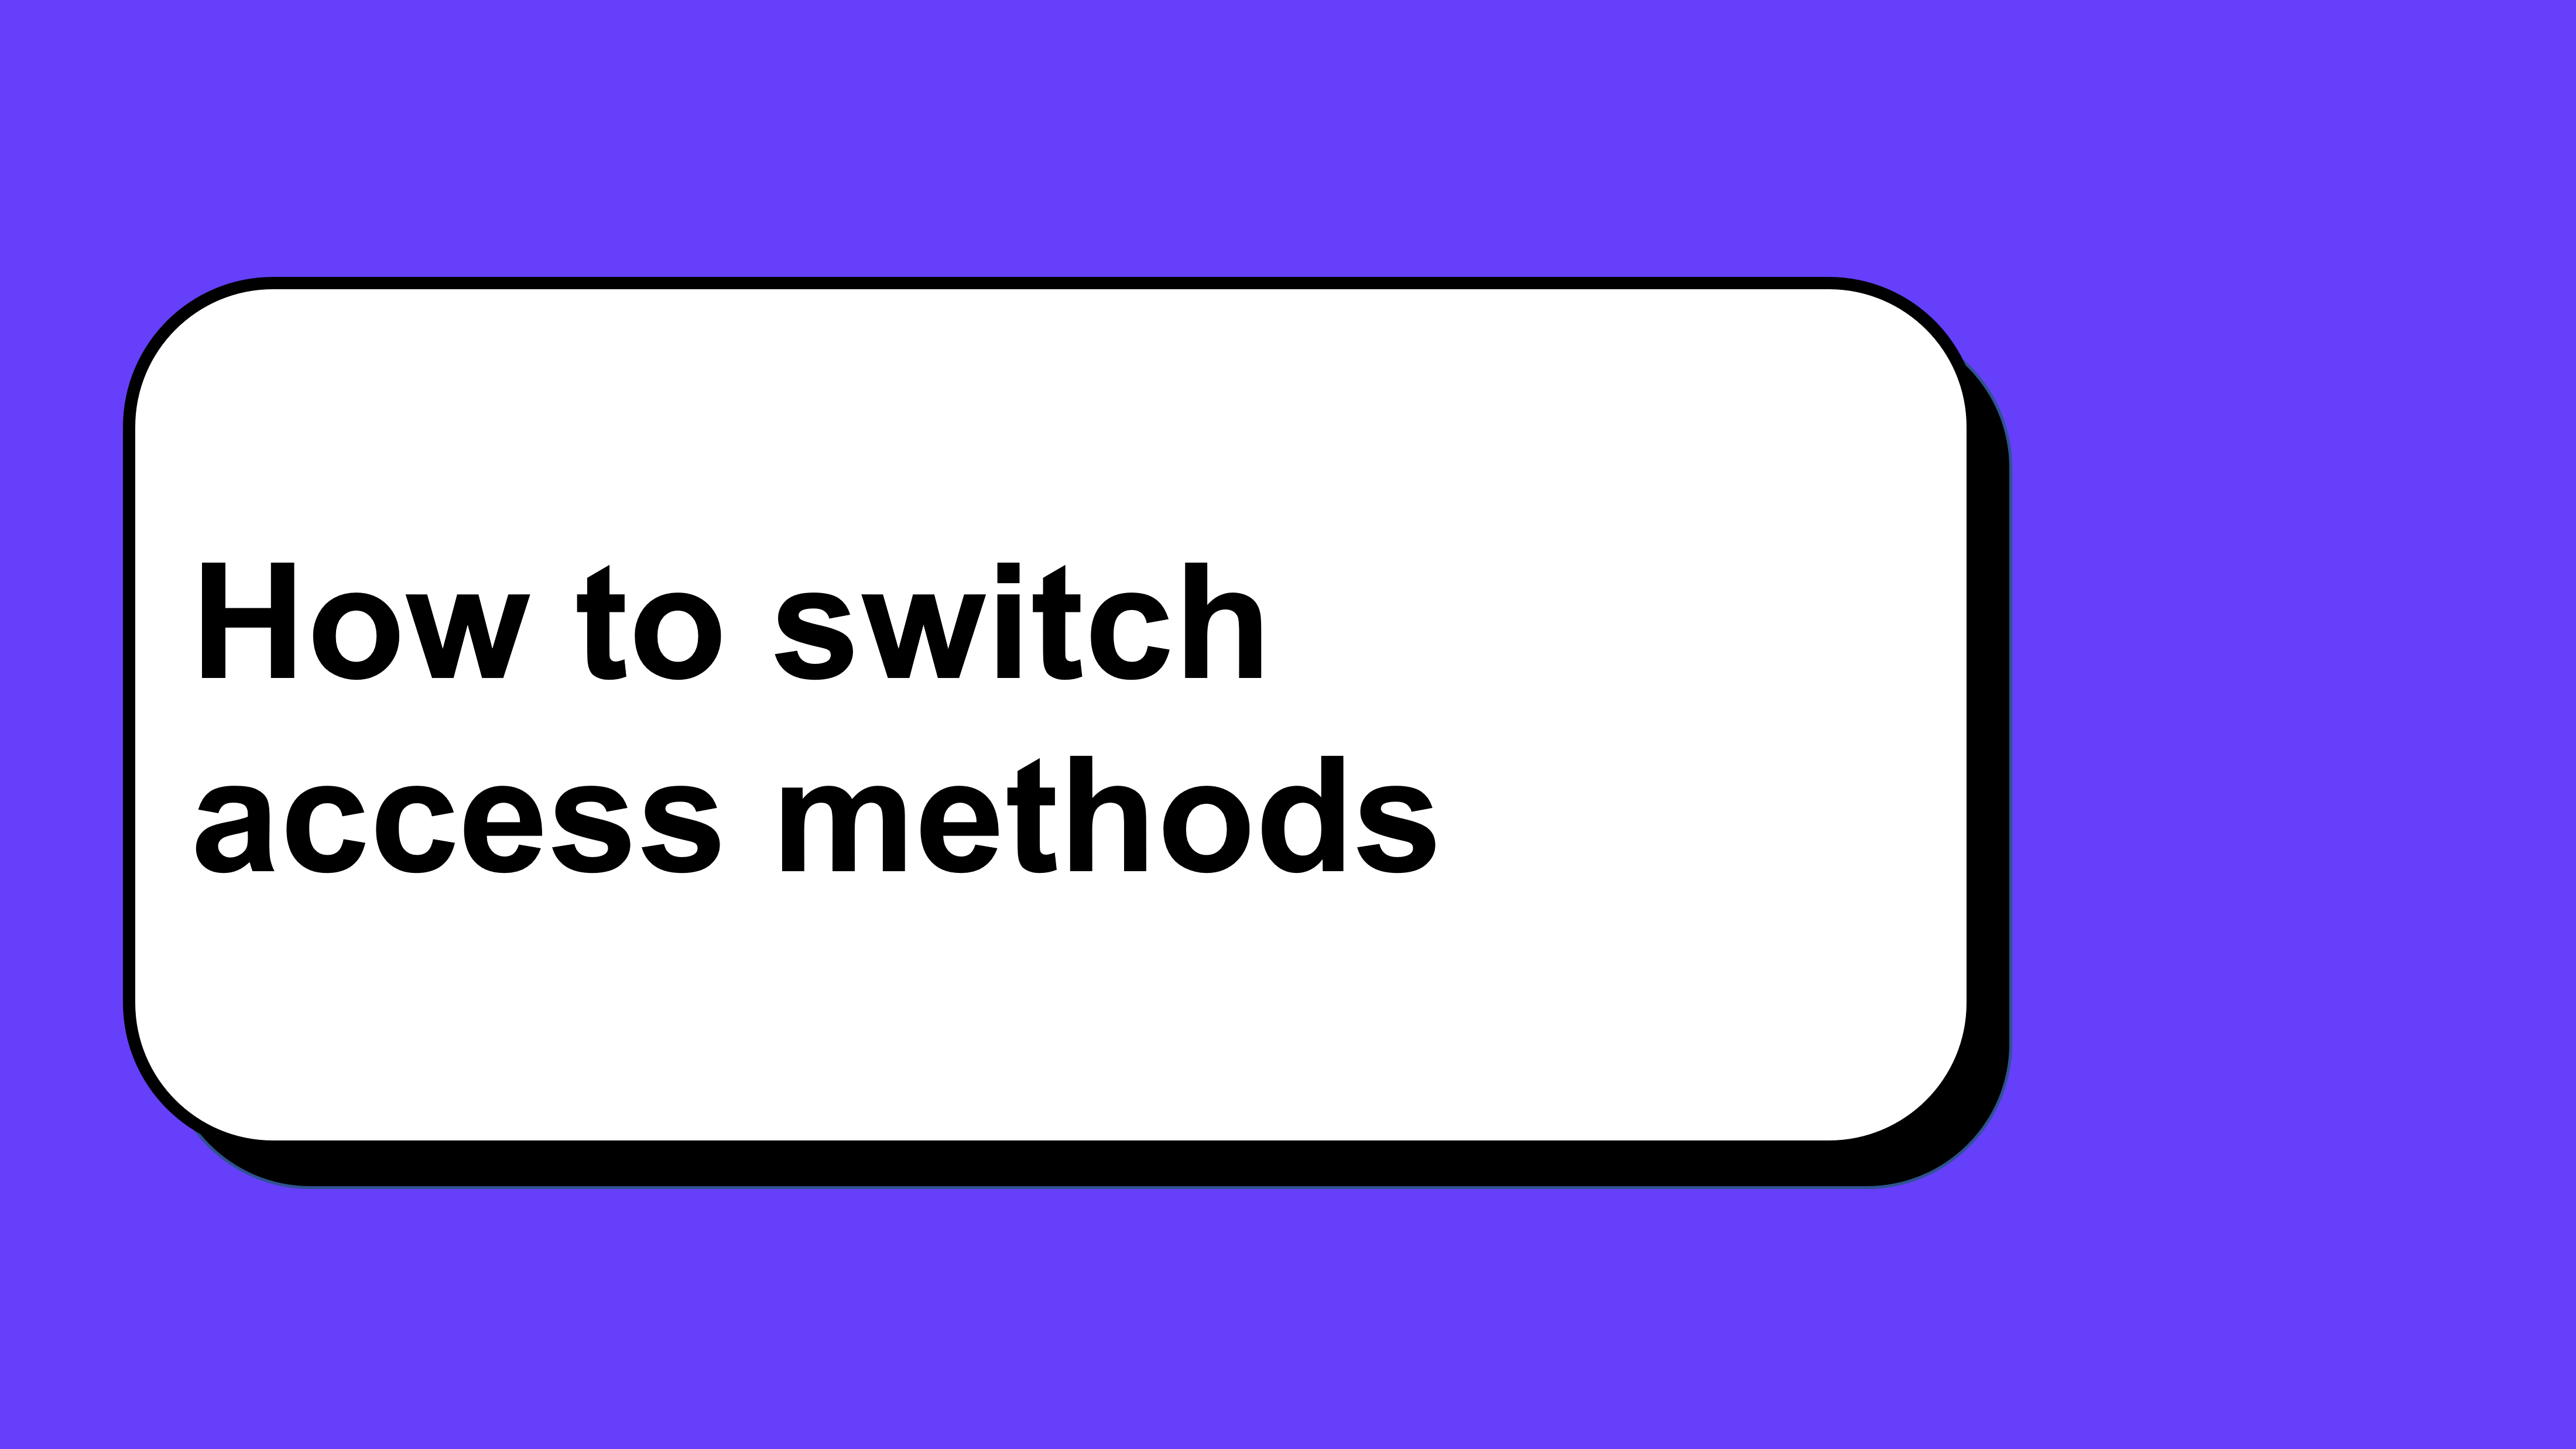 How to switch access methods